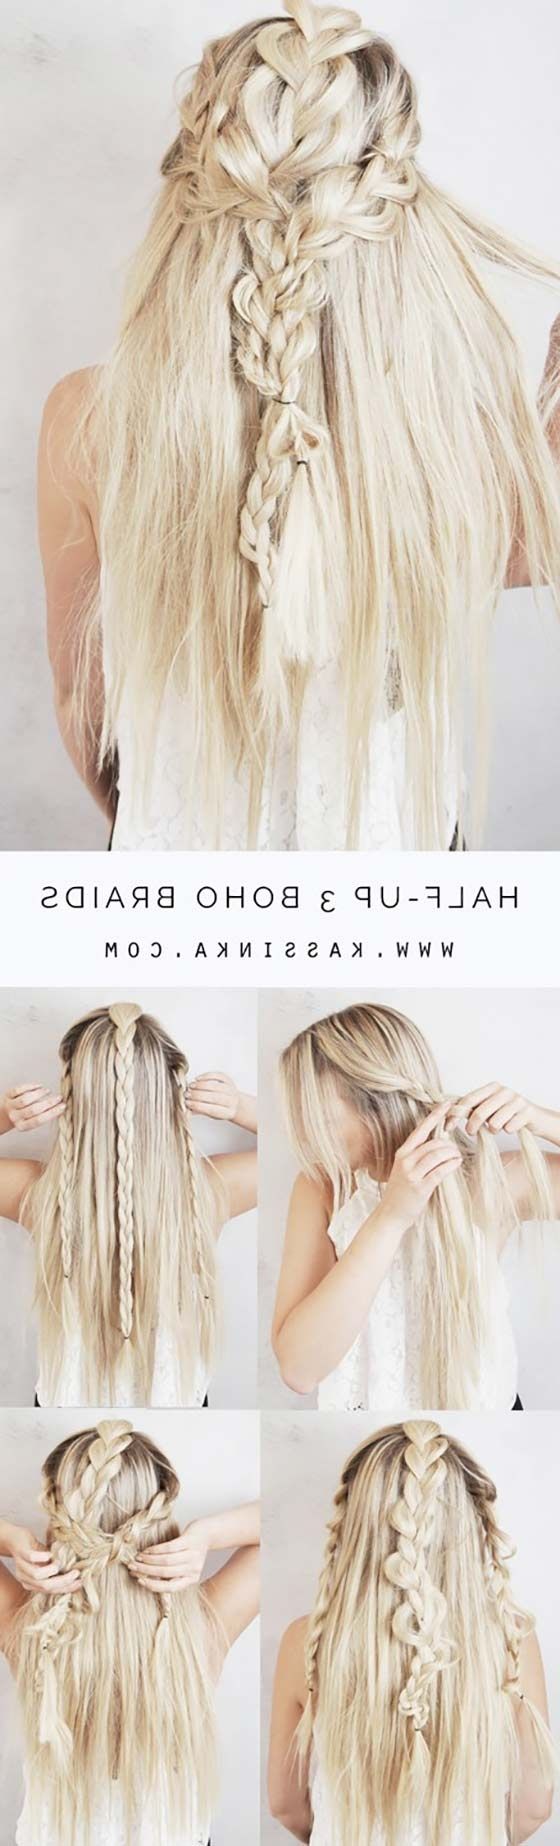 40 Braided Hairstyles For Long Hair With 2017 Boho Braided Hairstyles (View 13 of 15)